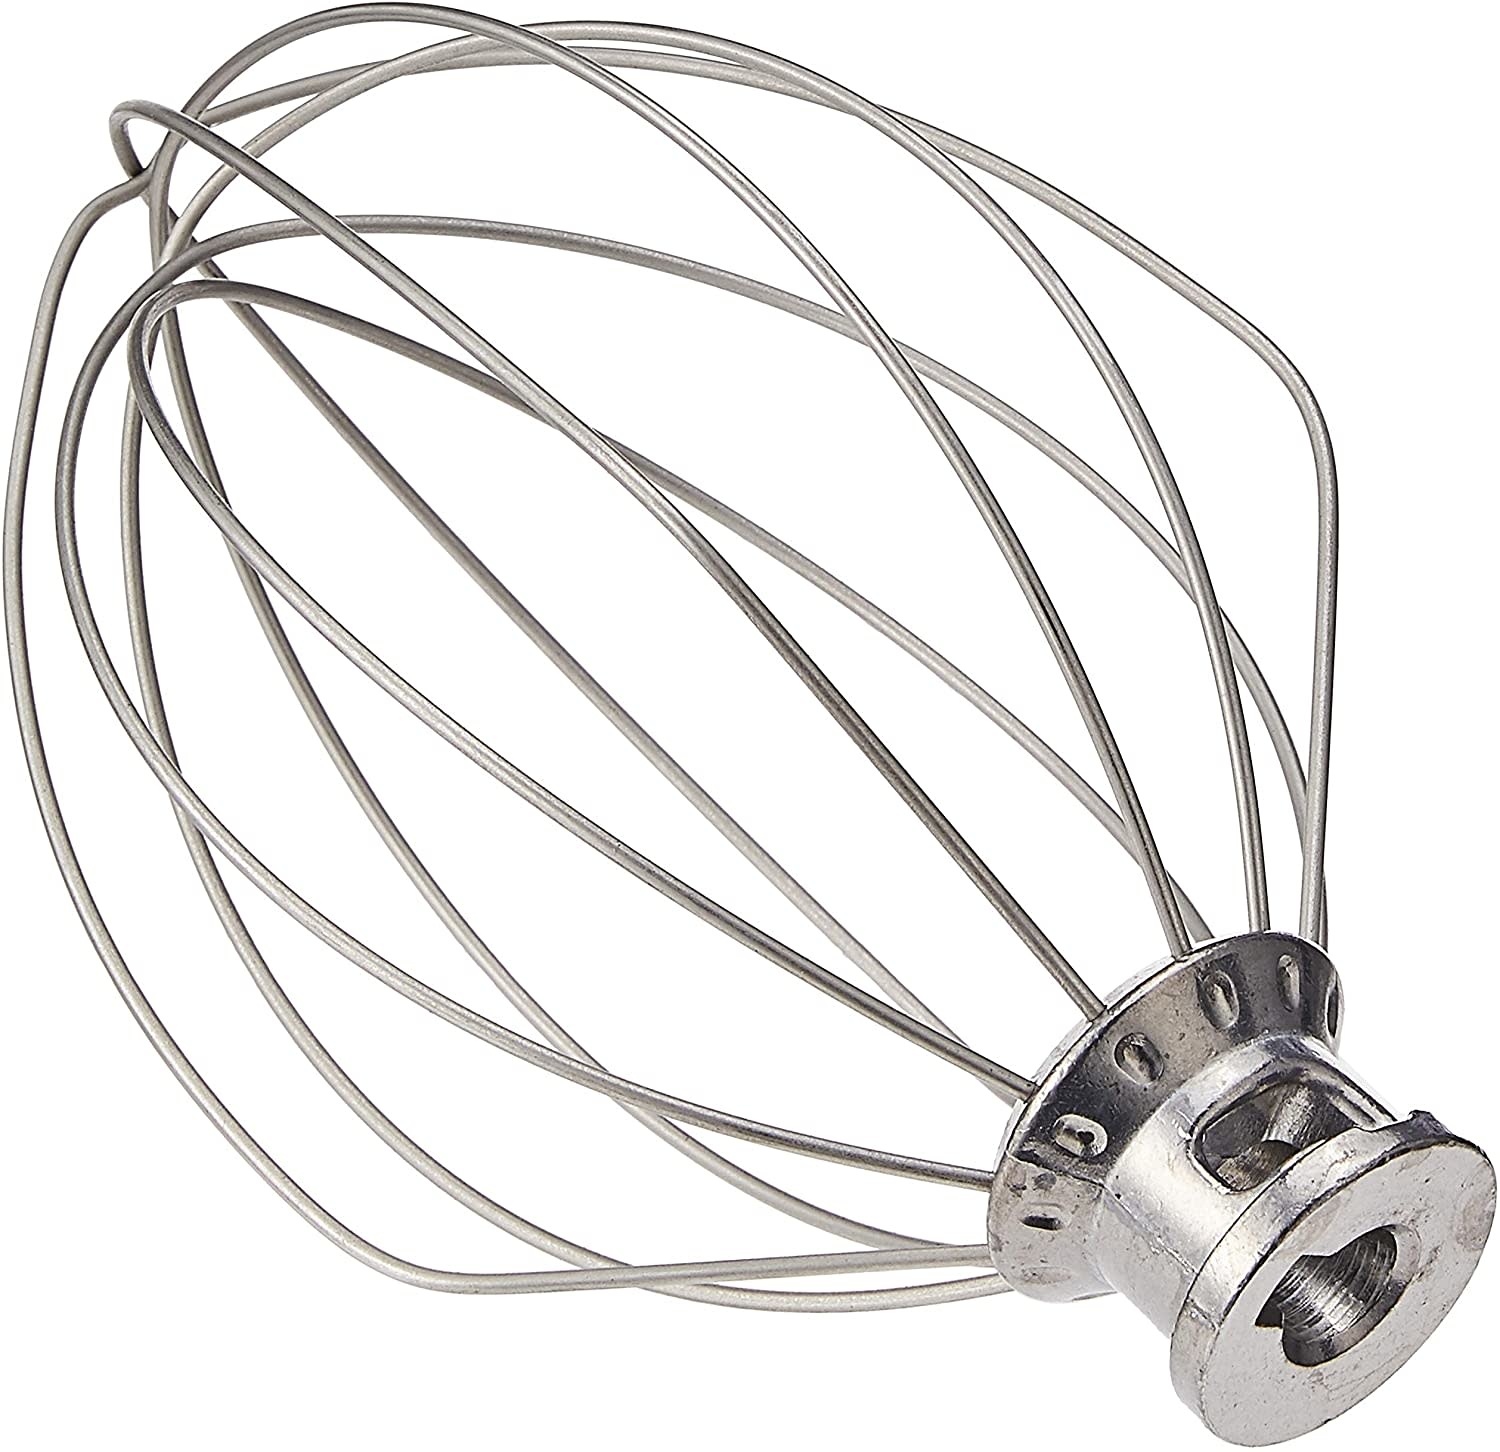 KitchenAid 6 Wire Whip (for 5 QT Bowl-Lift Stand Mixer)